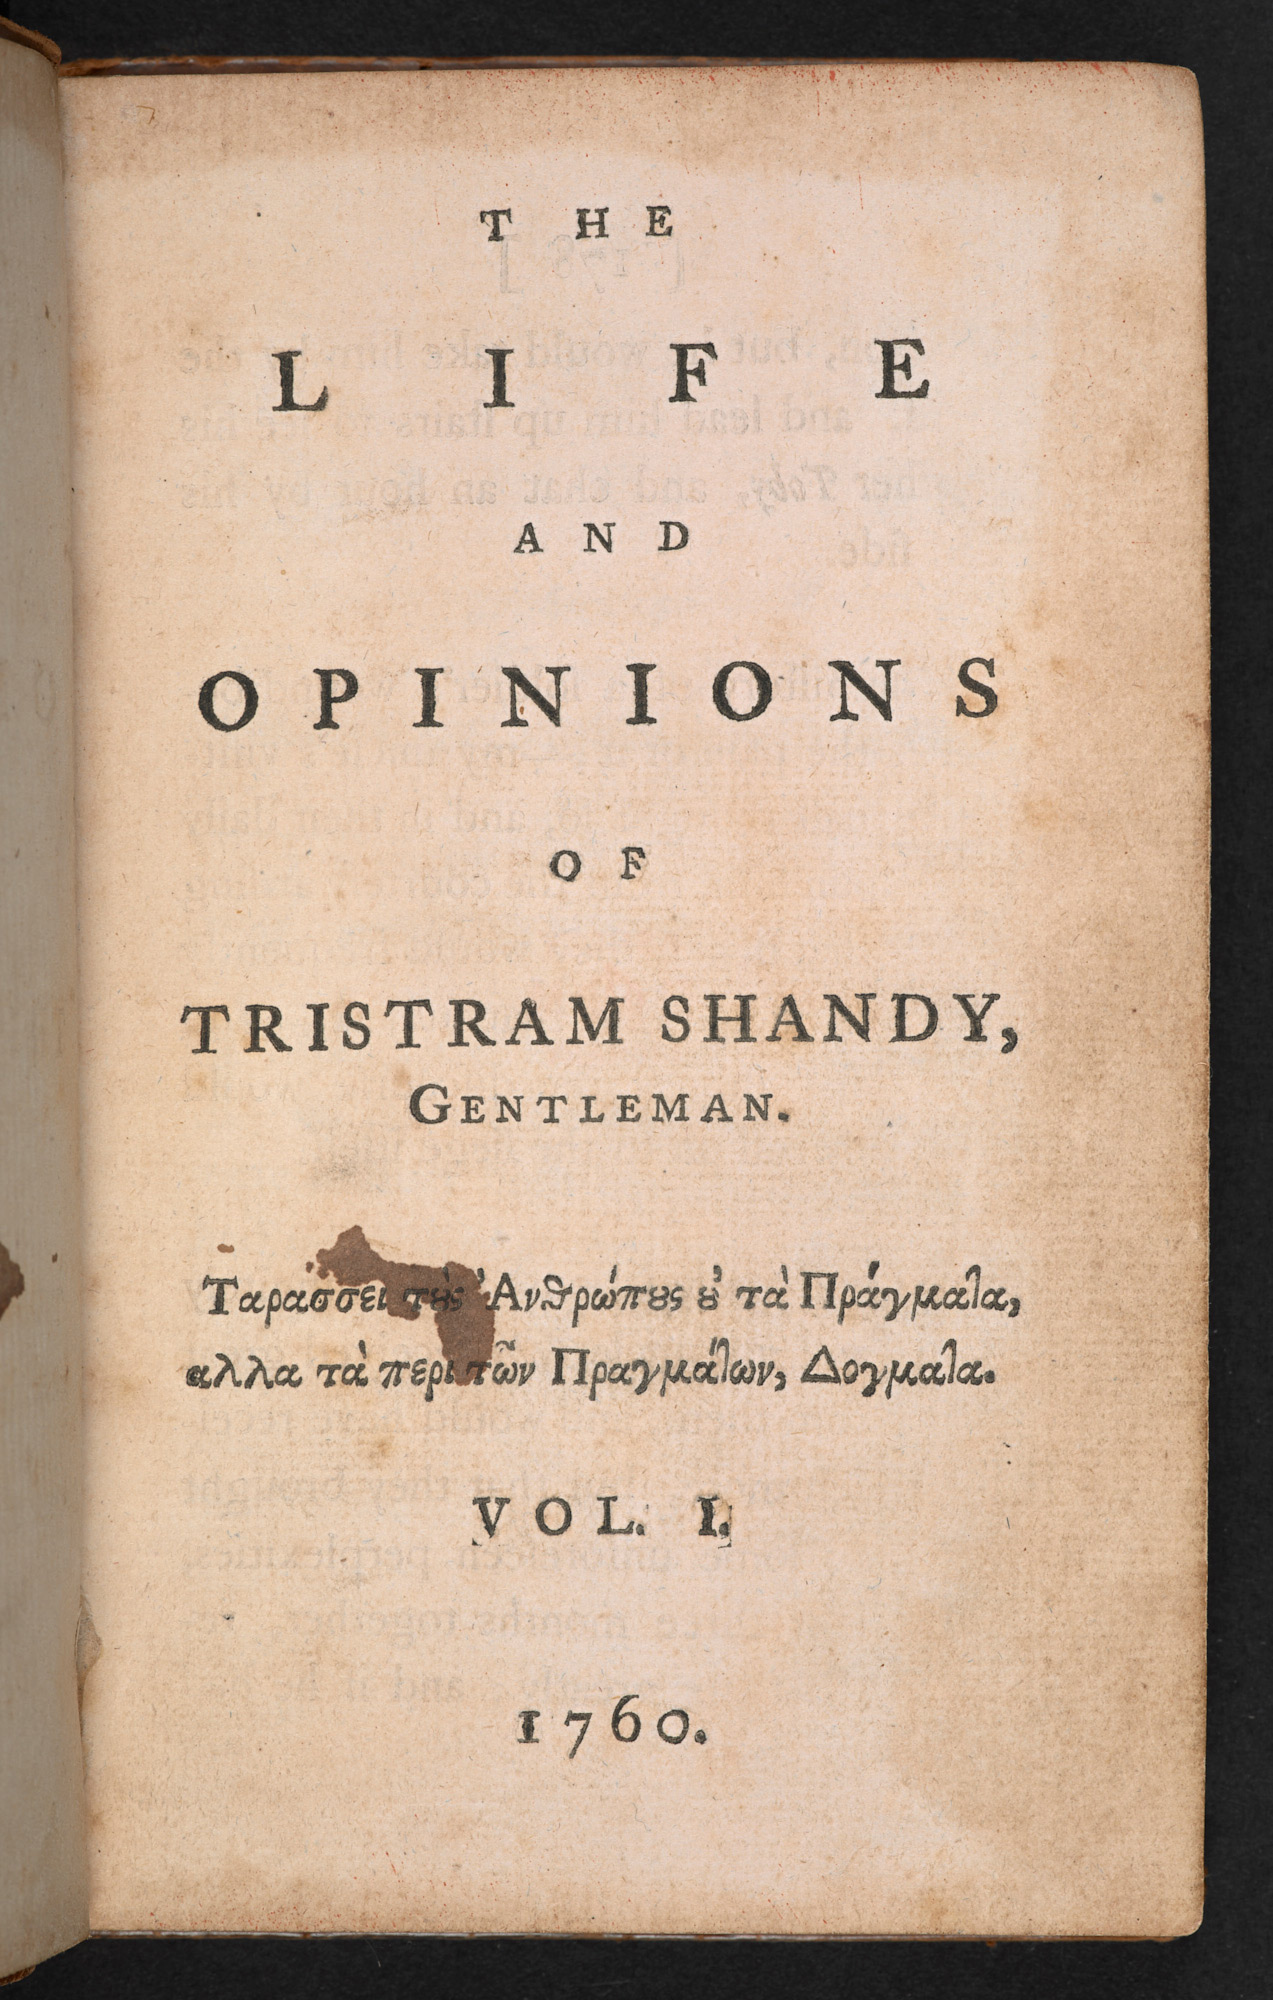 The Life and Opinions of Tristram Shandy, British Library